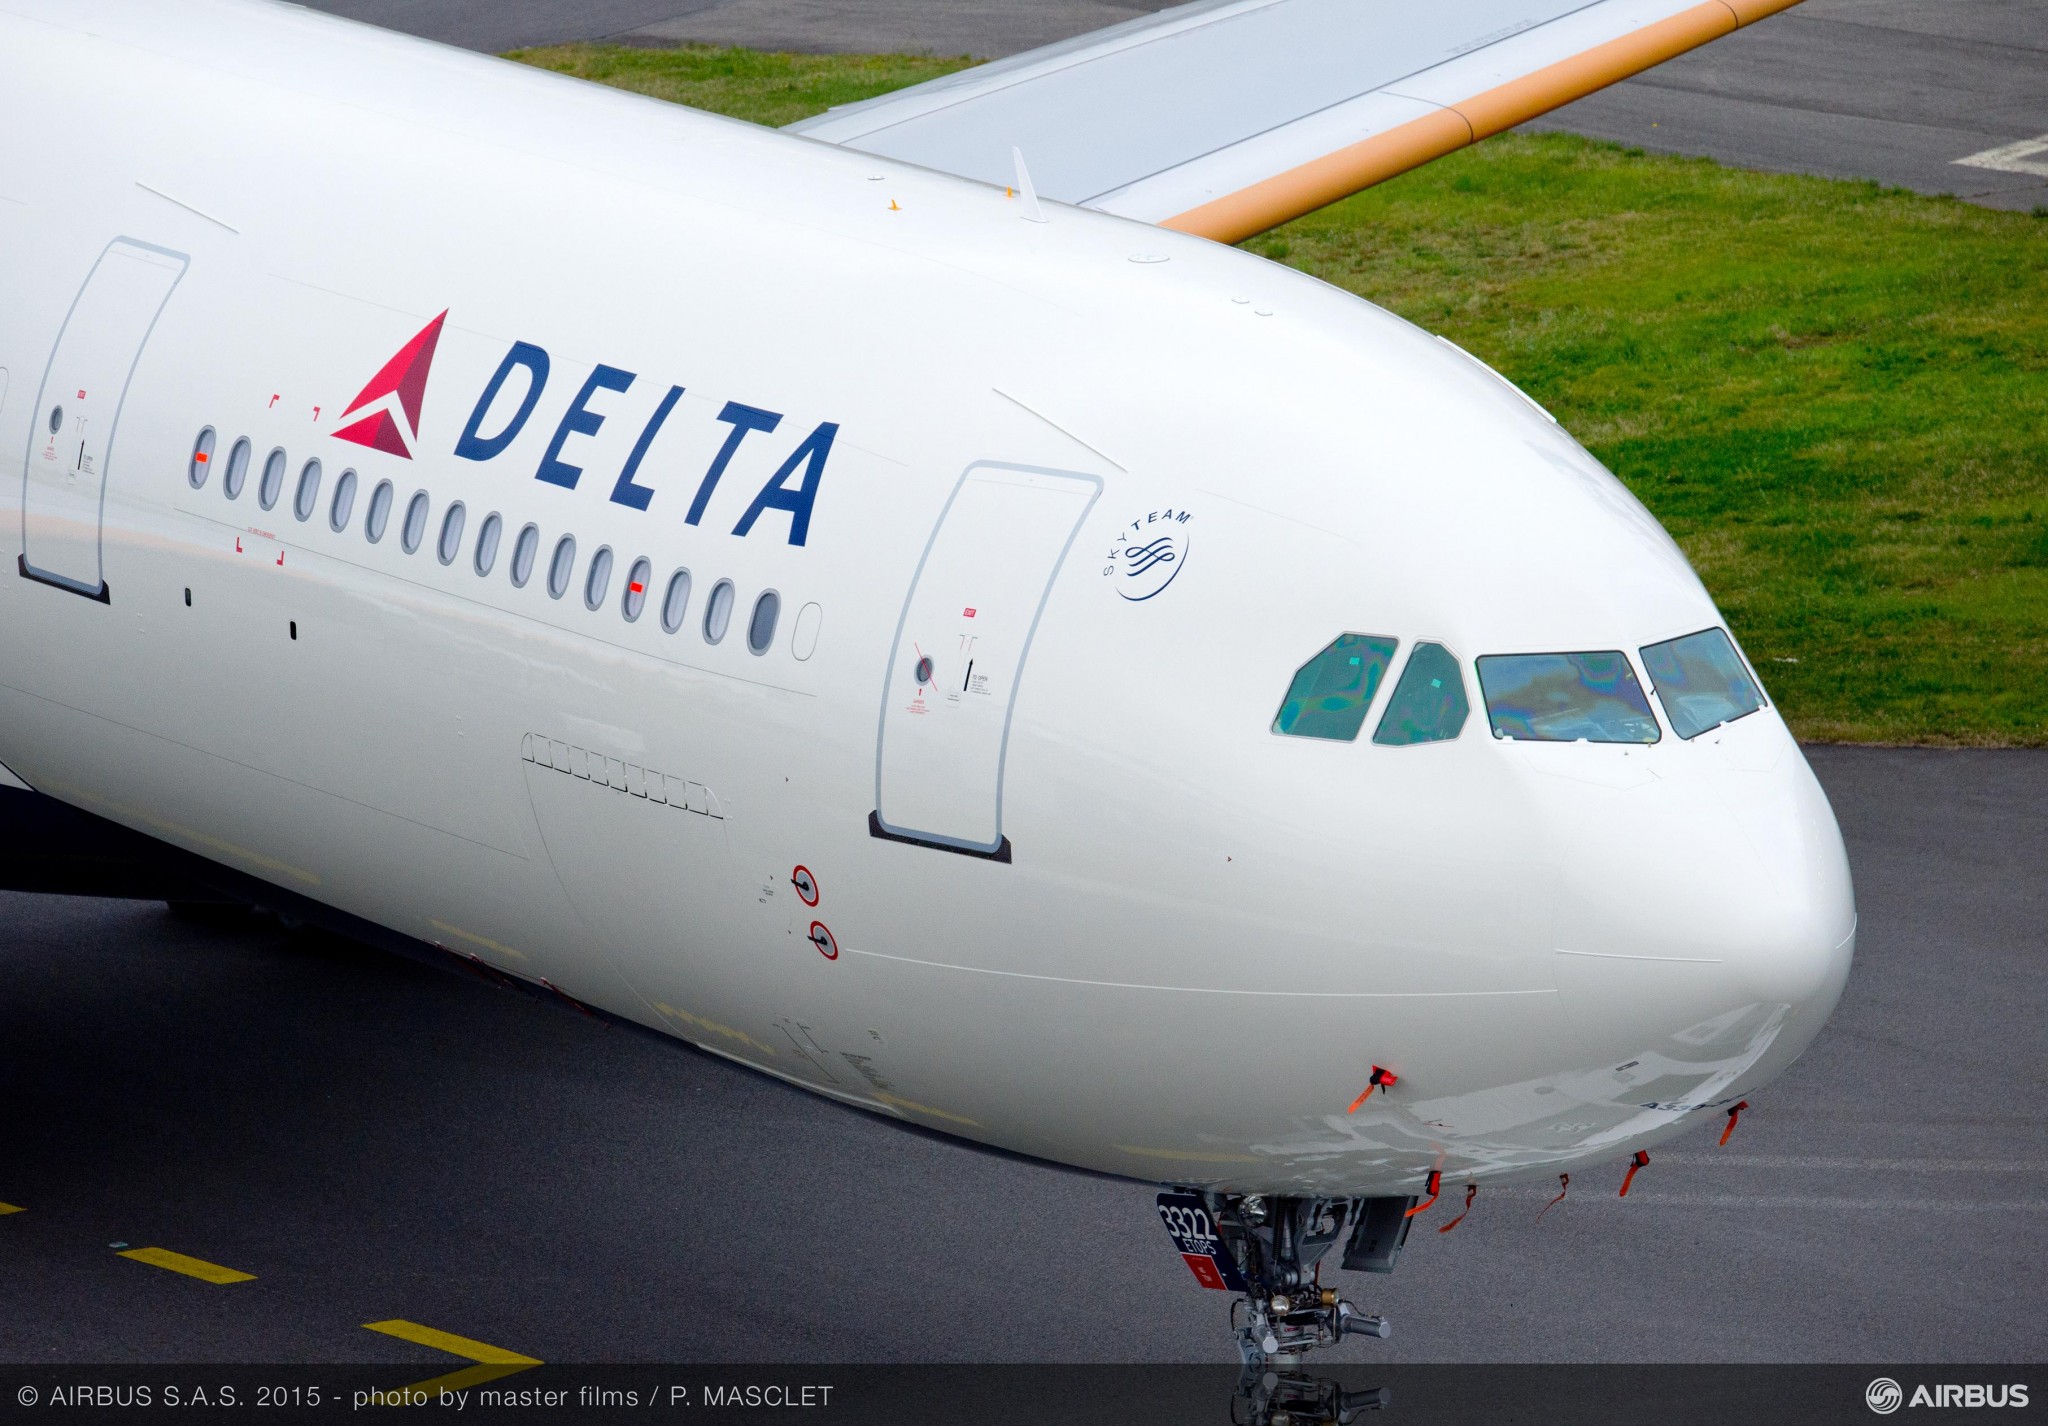 Airbus, Delta Air Lines partner on Skywise open-data platform and predictive maintenance services